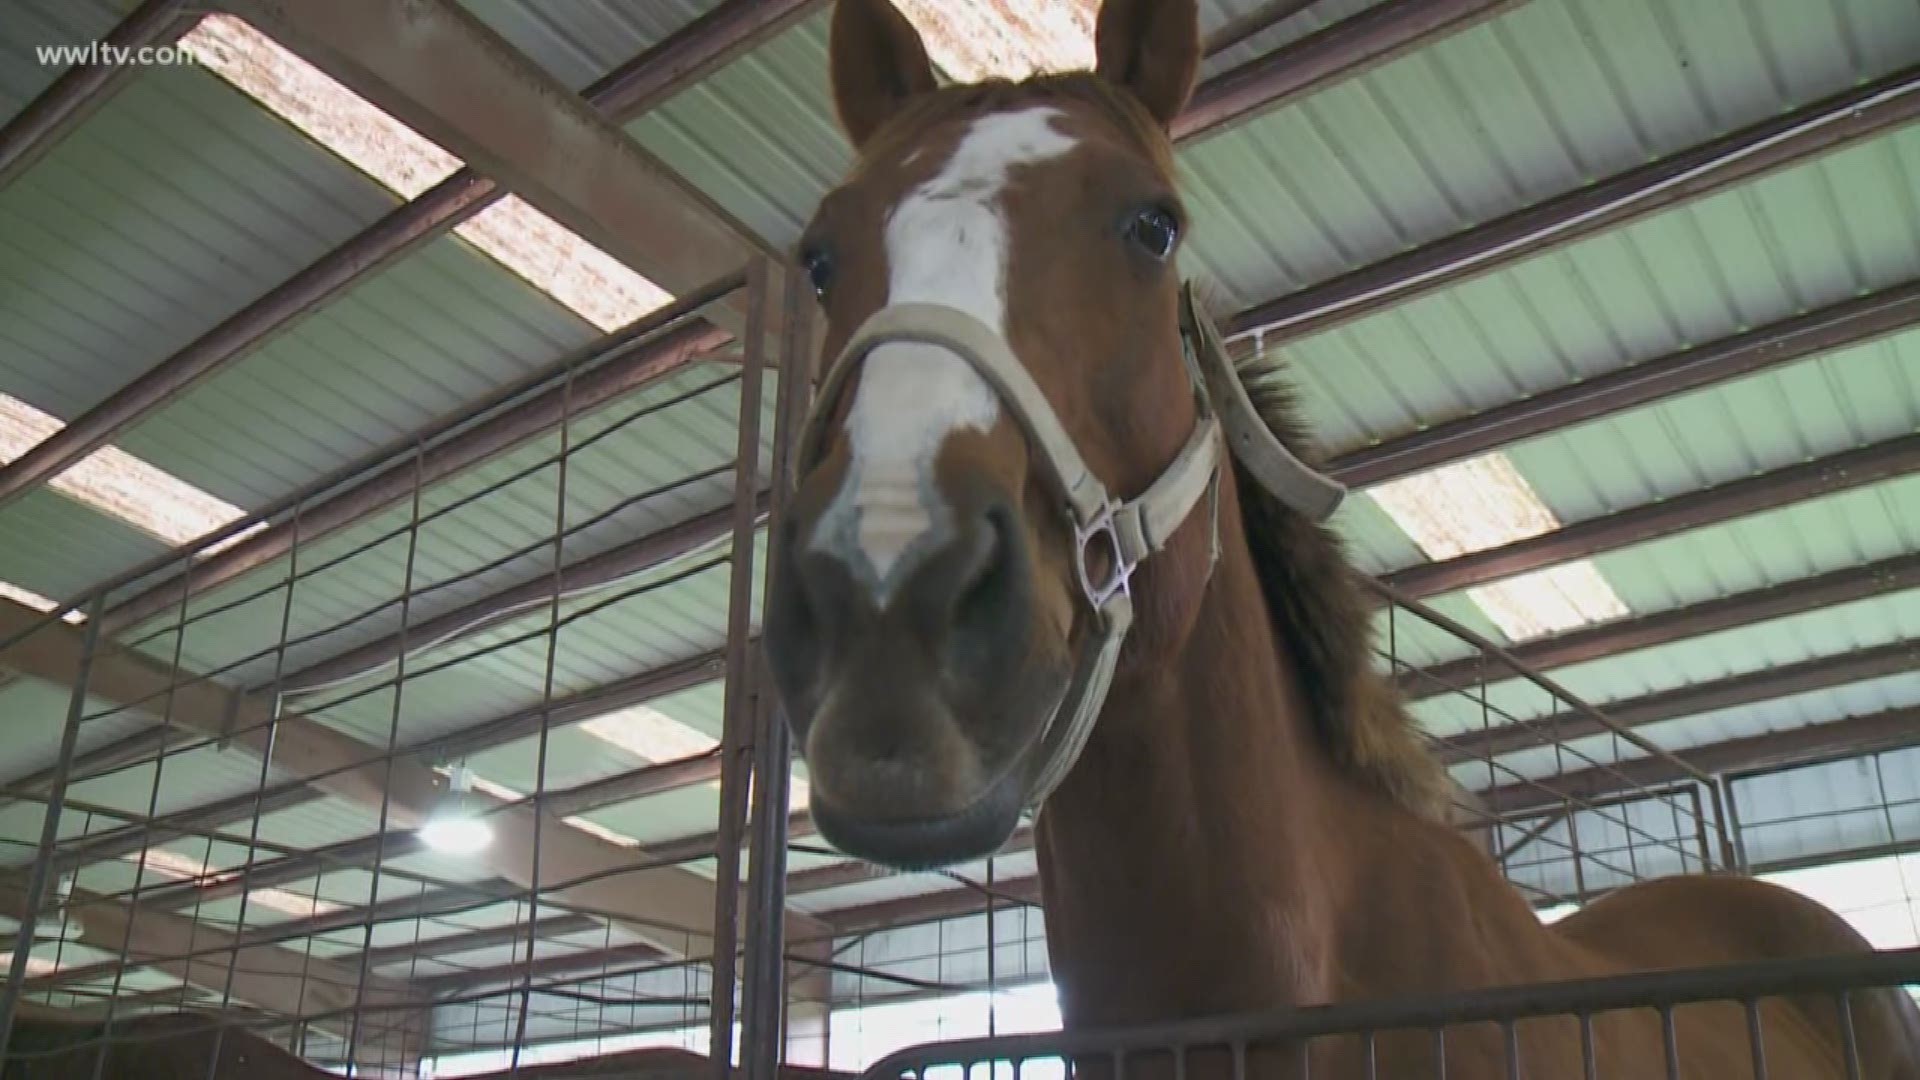 The Humane Society of Louisiana, Cascade Stables and Barney's Farm Sanctuary is teaming up to find new owners for 16 parade horses after Mardi Gras.